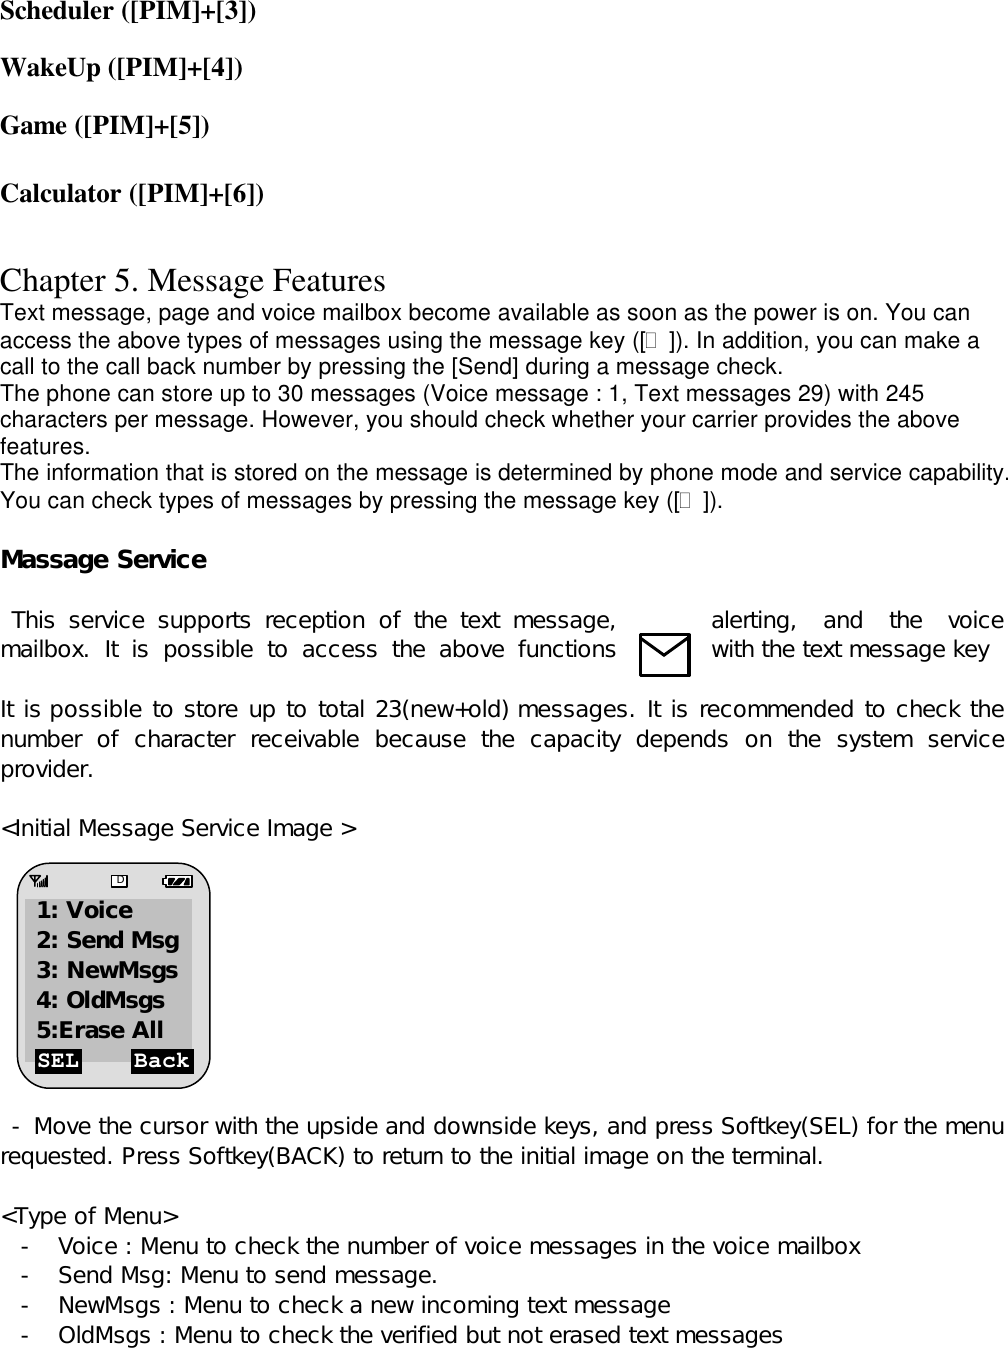 Scheduler ([PIM]+[3])  WakeUp ([PIM]+[4])  Game ([PIM]+[5])  Calculator ([PIM]+[6])   Chapter 5. Message Features Text message, page and voice mailbox become available as soon as the power is on. You can access the above types of messages using the message key ([?]). In addition, you can make a call to the call back number by pressing the [Send] during a message check. The phone can store up to 30 messages (Voice message : 1, Text messages 29) with 245 characters per message. However, you should check whether your carrier provides the above features. The information that is stored on the message is determined by phone mode and service capability. You can check types of messages by pressing the message key ([?]).  Massage Service    This service supports reception of the text message,  alerting, and the voice mailbox. It is  possible to access the above functions  with the text message key      It is possible to store up to total 23(new+old) messages. It is recommended to check the number of  character receivable because the capacity depends on the system service provider.   &lt;Initial Message Service Image &gt;           - Move the cursor with the upside and downside keys, and press Softkey(SEL) for the menu requested. Press Softkey(BACK) to return to the initial image on the terminal.  &lt;Type of Menu&gt; - Voice : Menu to check the number of voice messages in the voice mailbox - Send Msg: Menu to send message.  - NewMsgs : Menu to check a new incoming text message   - OldMsgs : Menu to check the verified but not erased text messages   SEL Back D 1: Voice 2: Send Msg 3: NewMsgs 4: OldMsgs  5:Erase All 